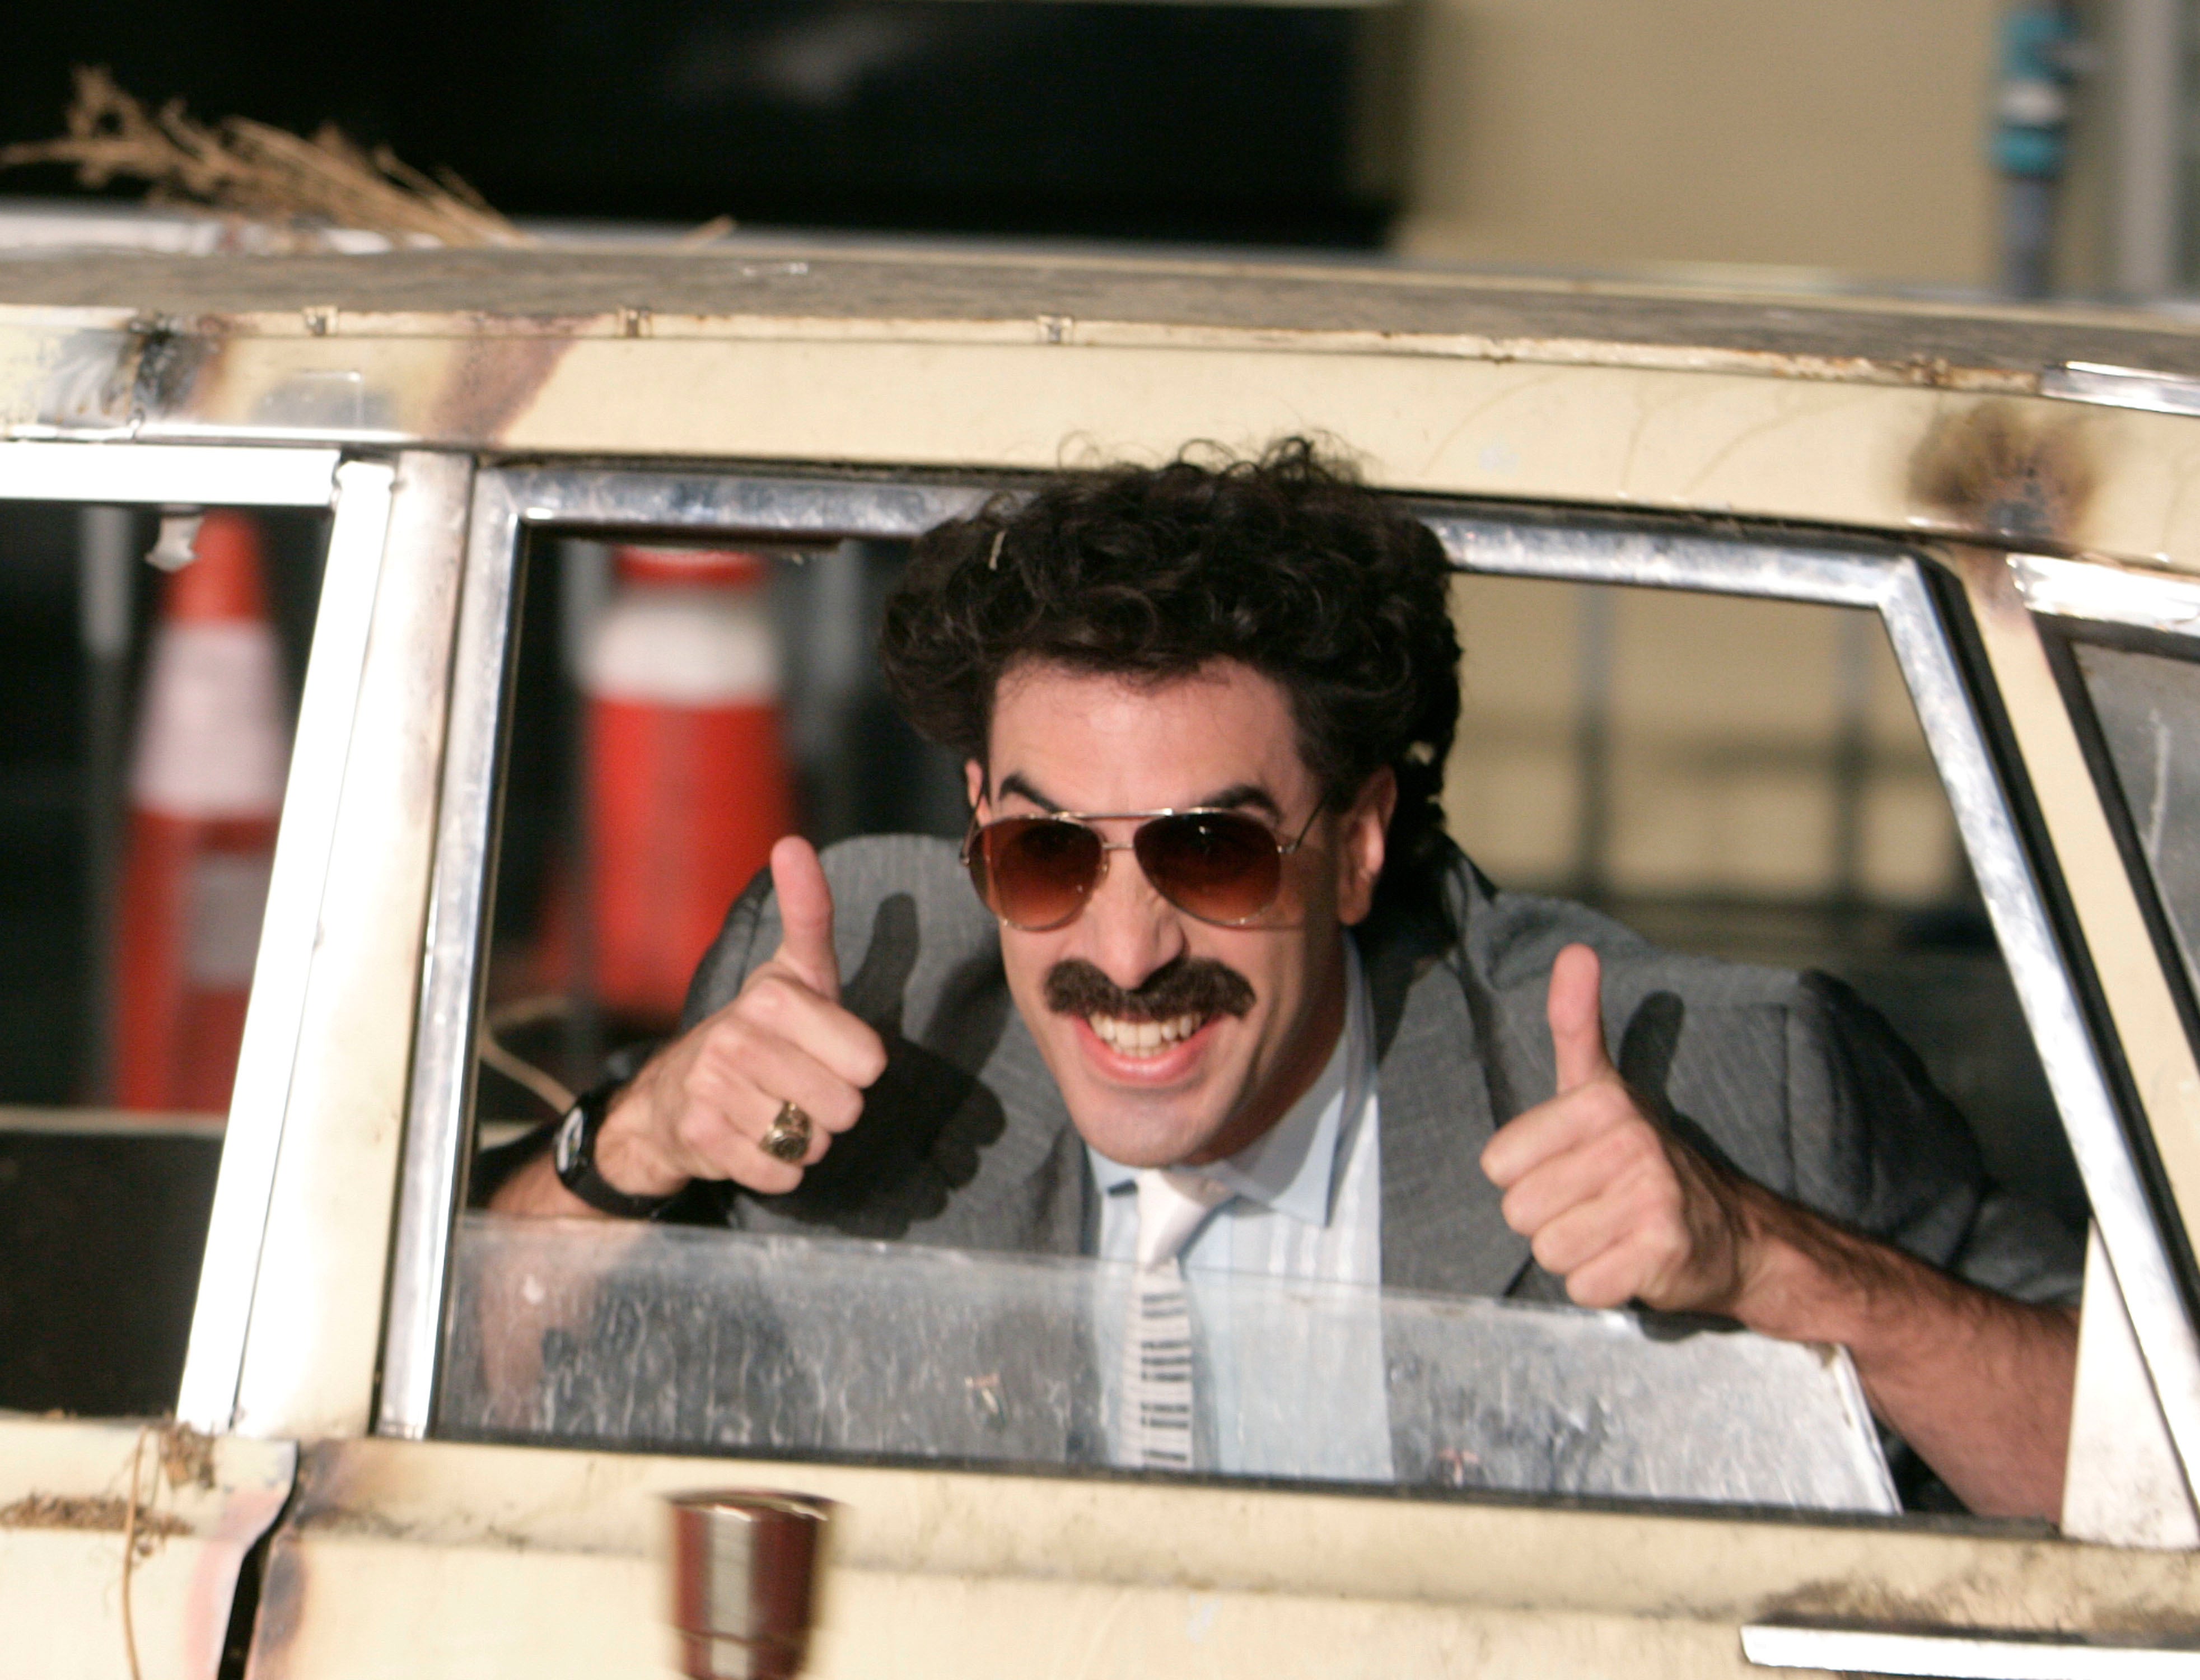 Watch Borat Return to Meddle With Midterms on 'Kimmel'